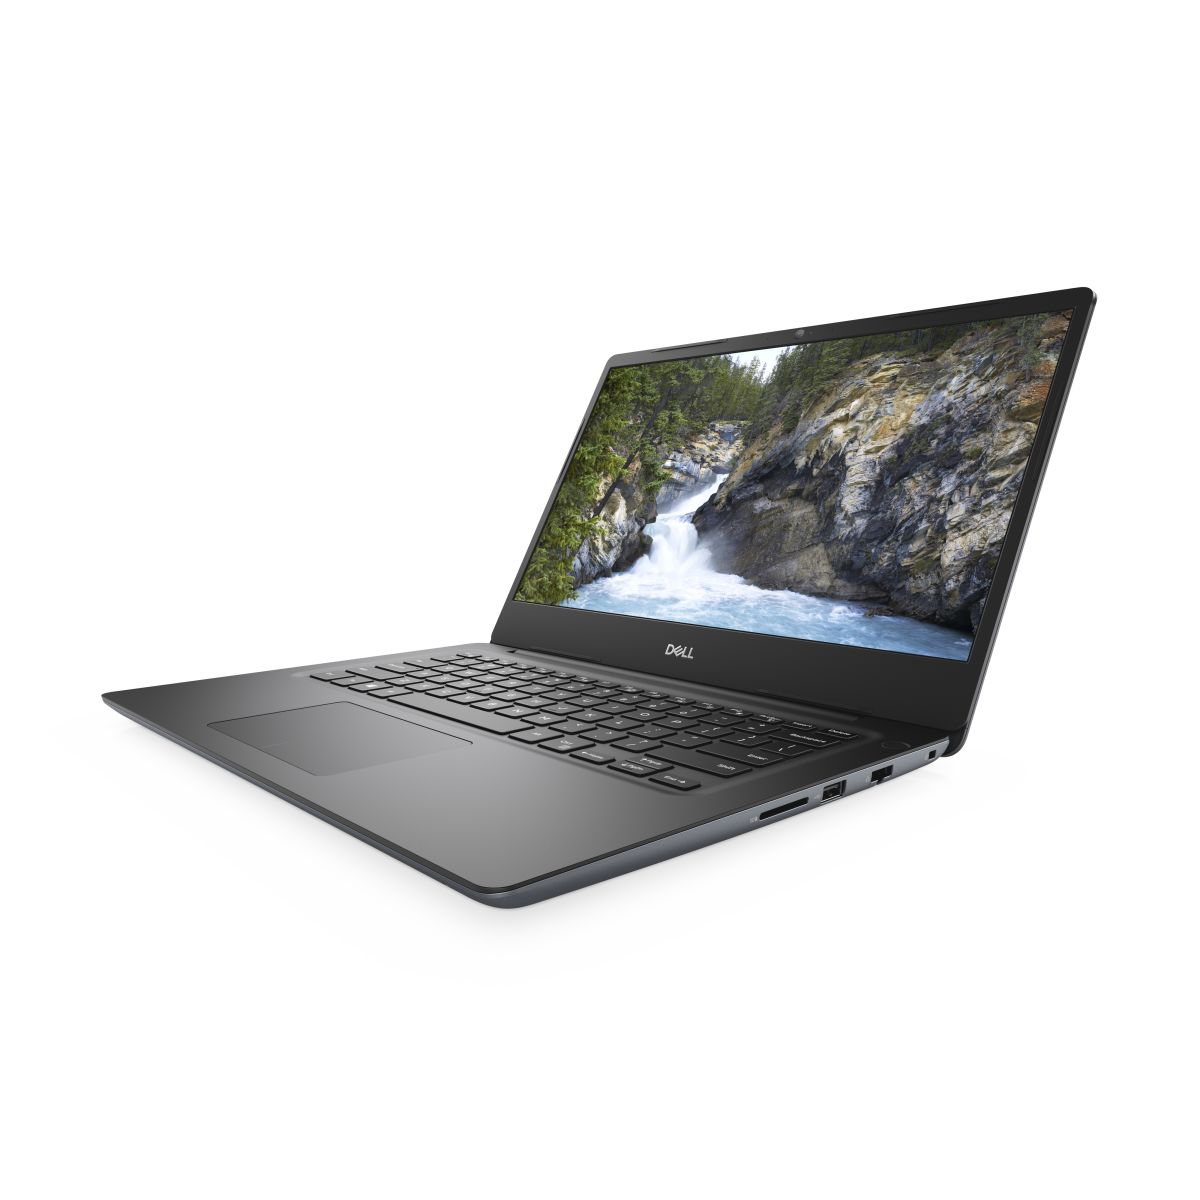 DELL Vostro 5481 - 8NH3G laptop specifications